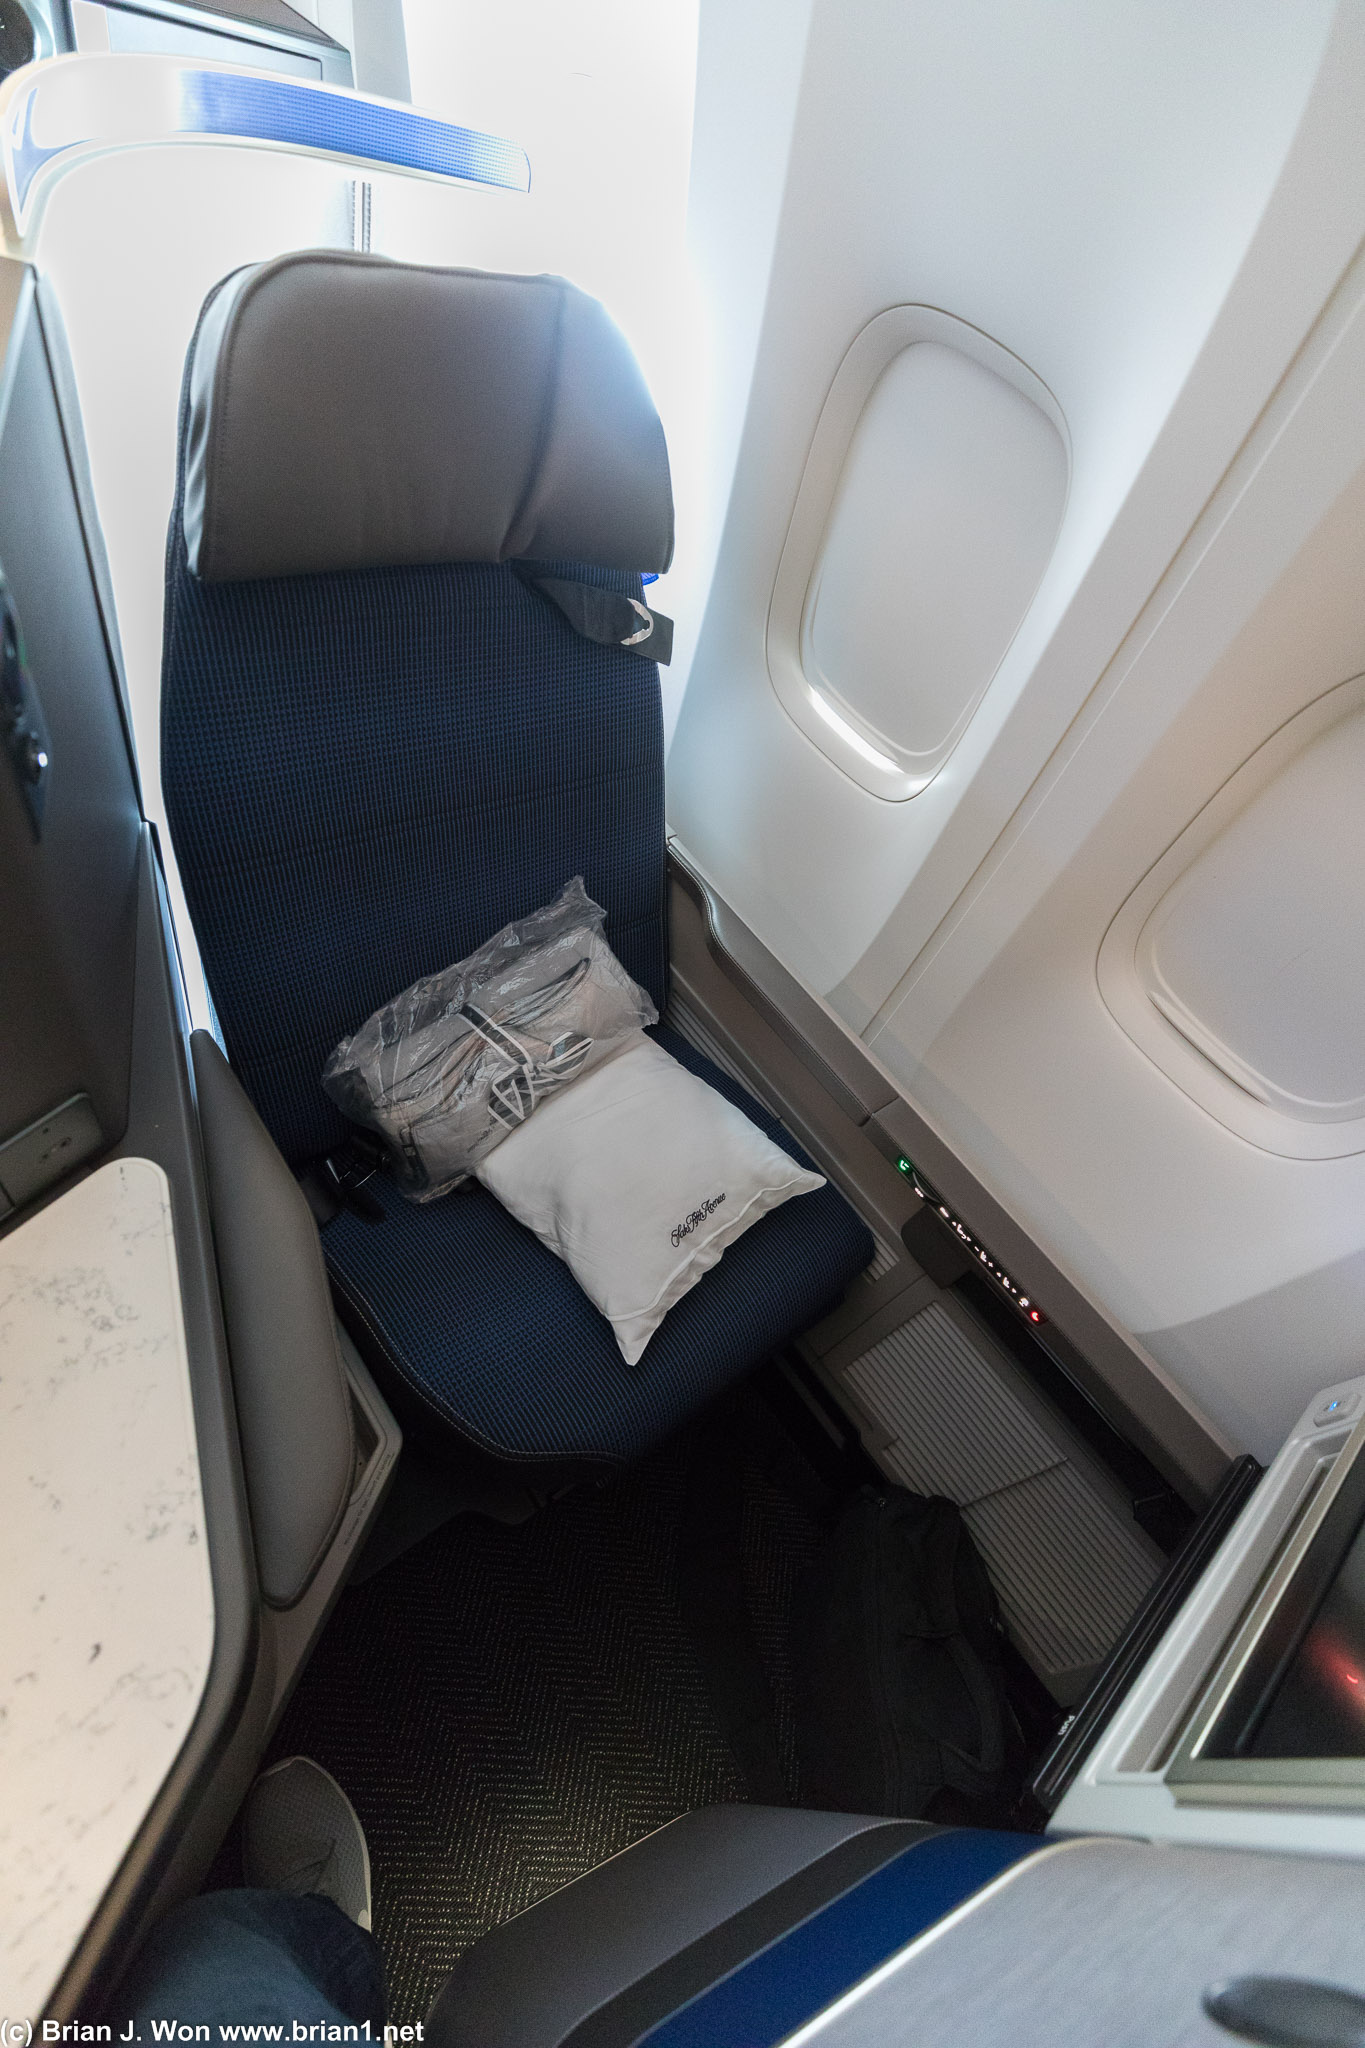 Window seats in odd-numbered rows are very private.